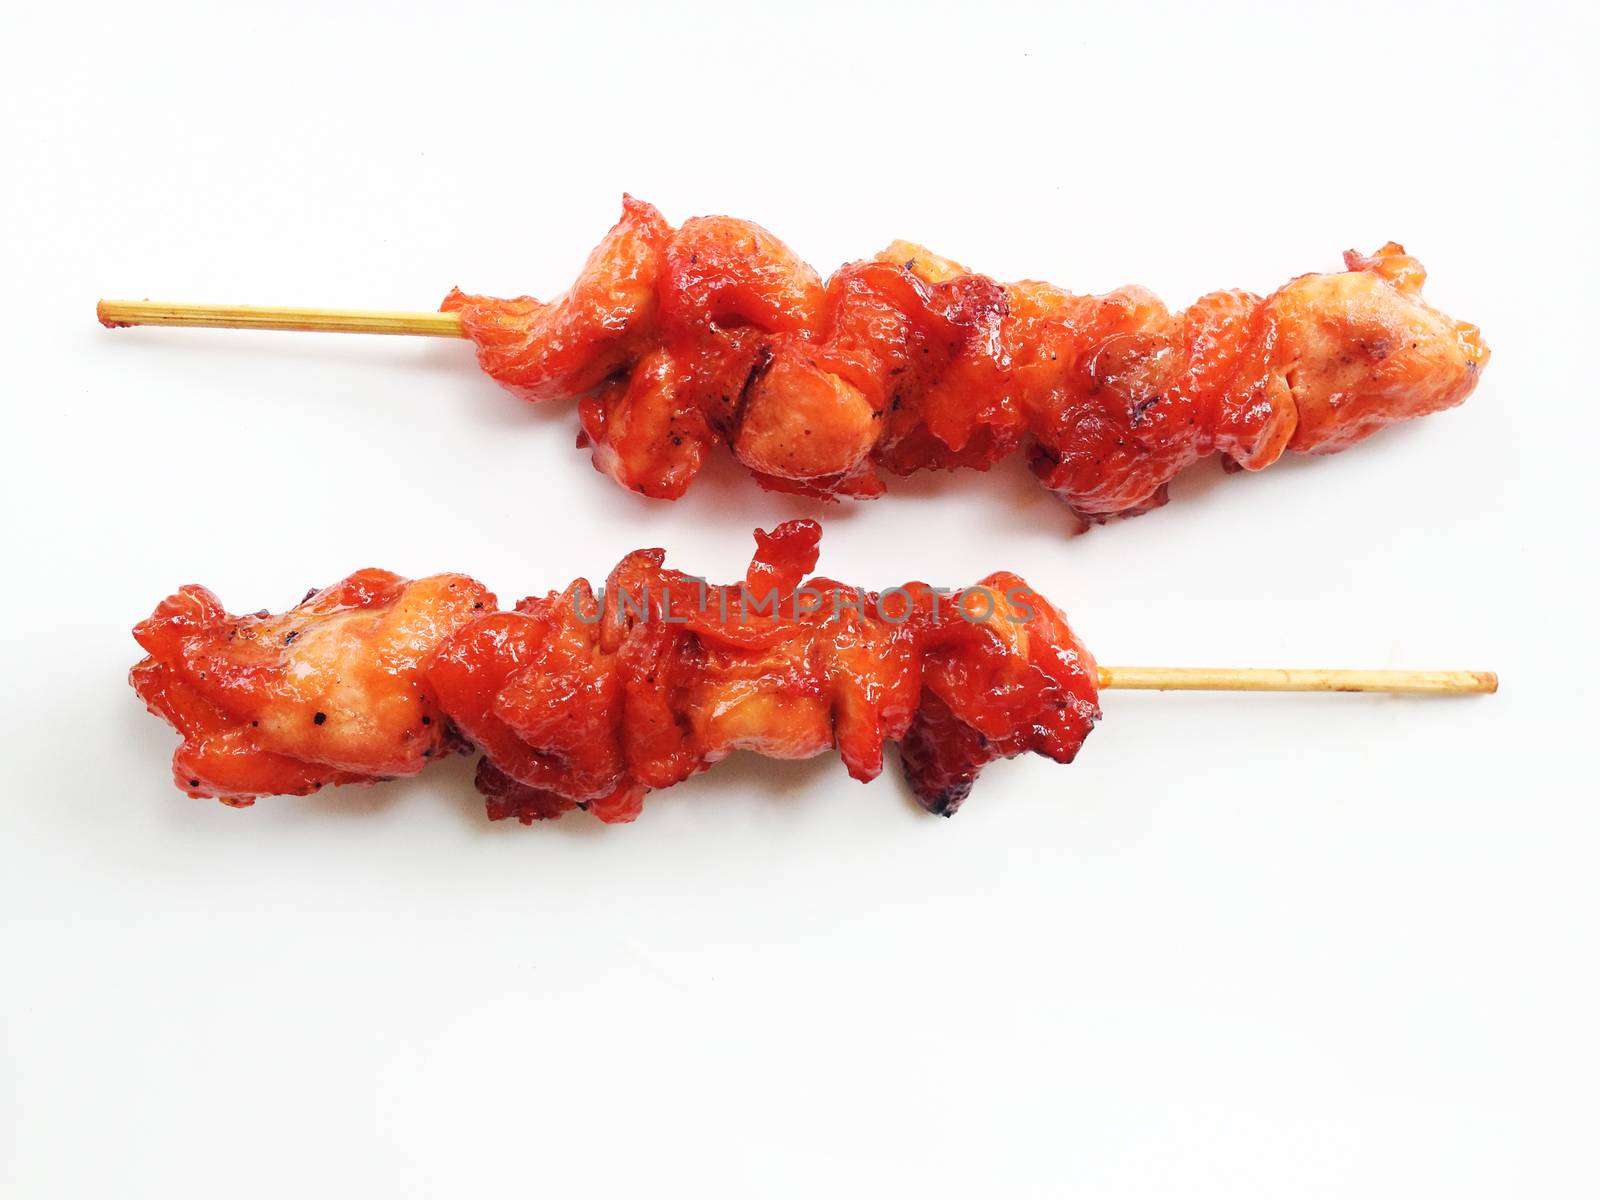 Grilled chicken on bamboo skewers  by Bowonpat